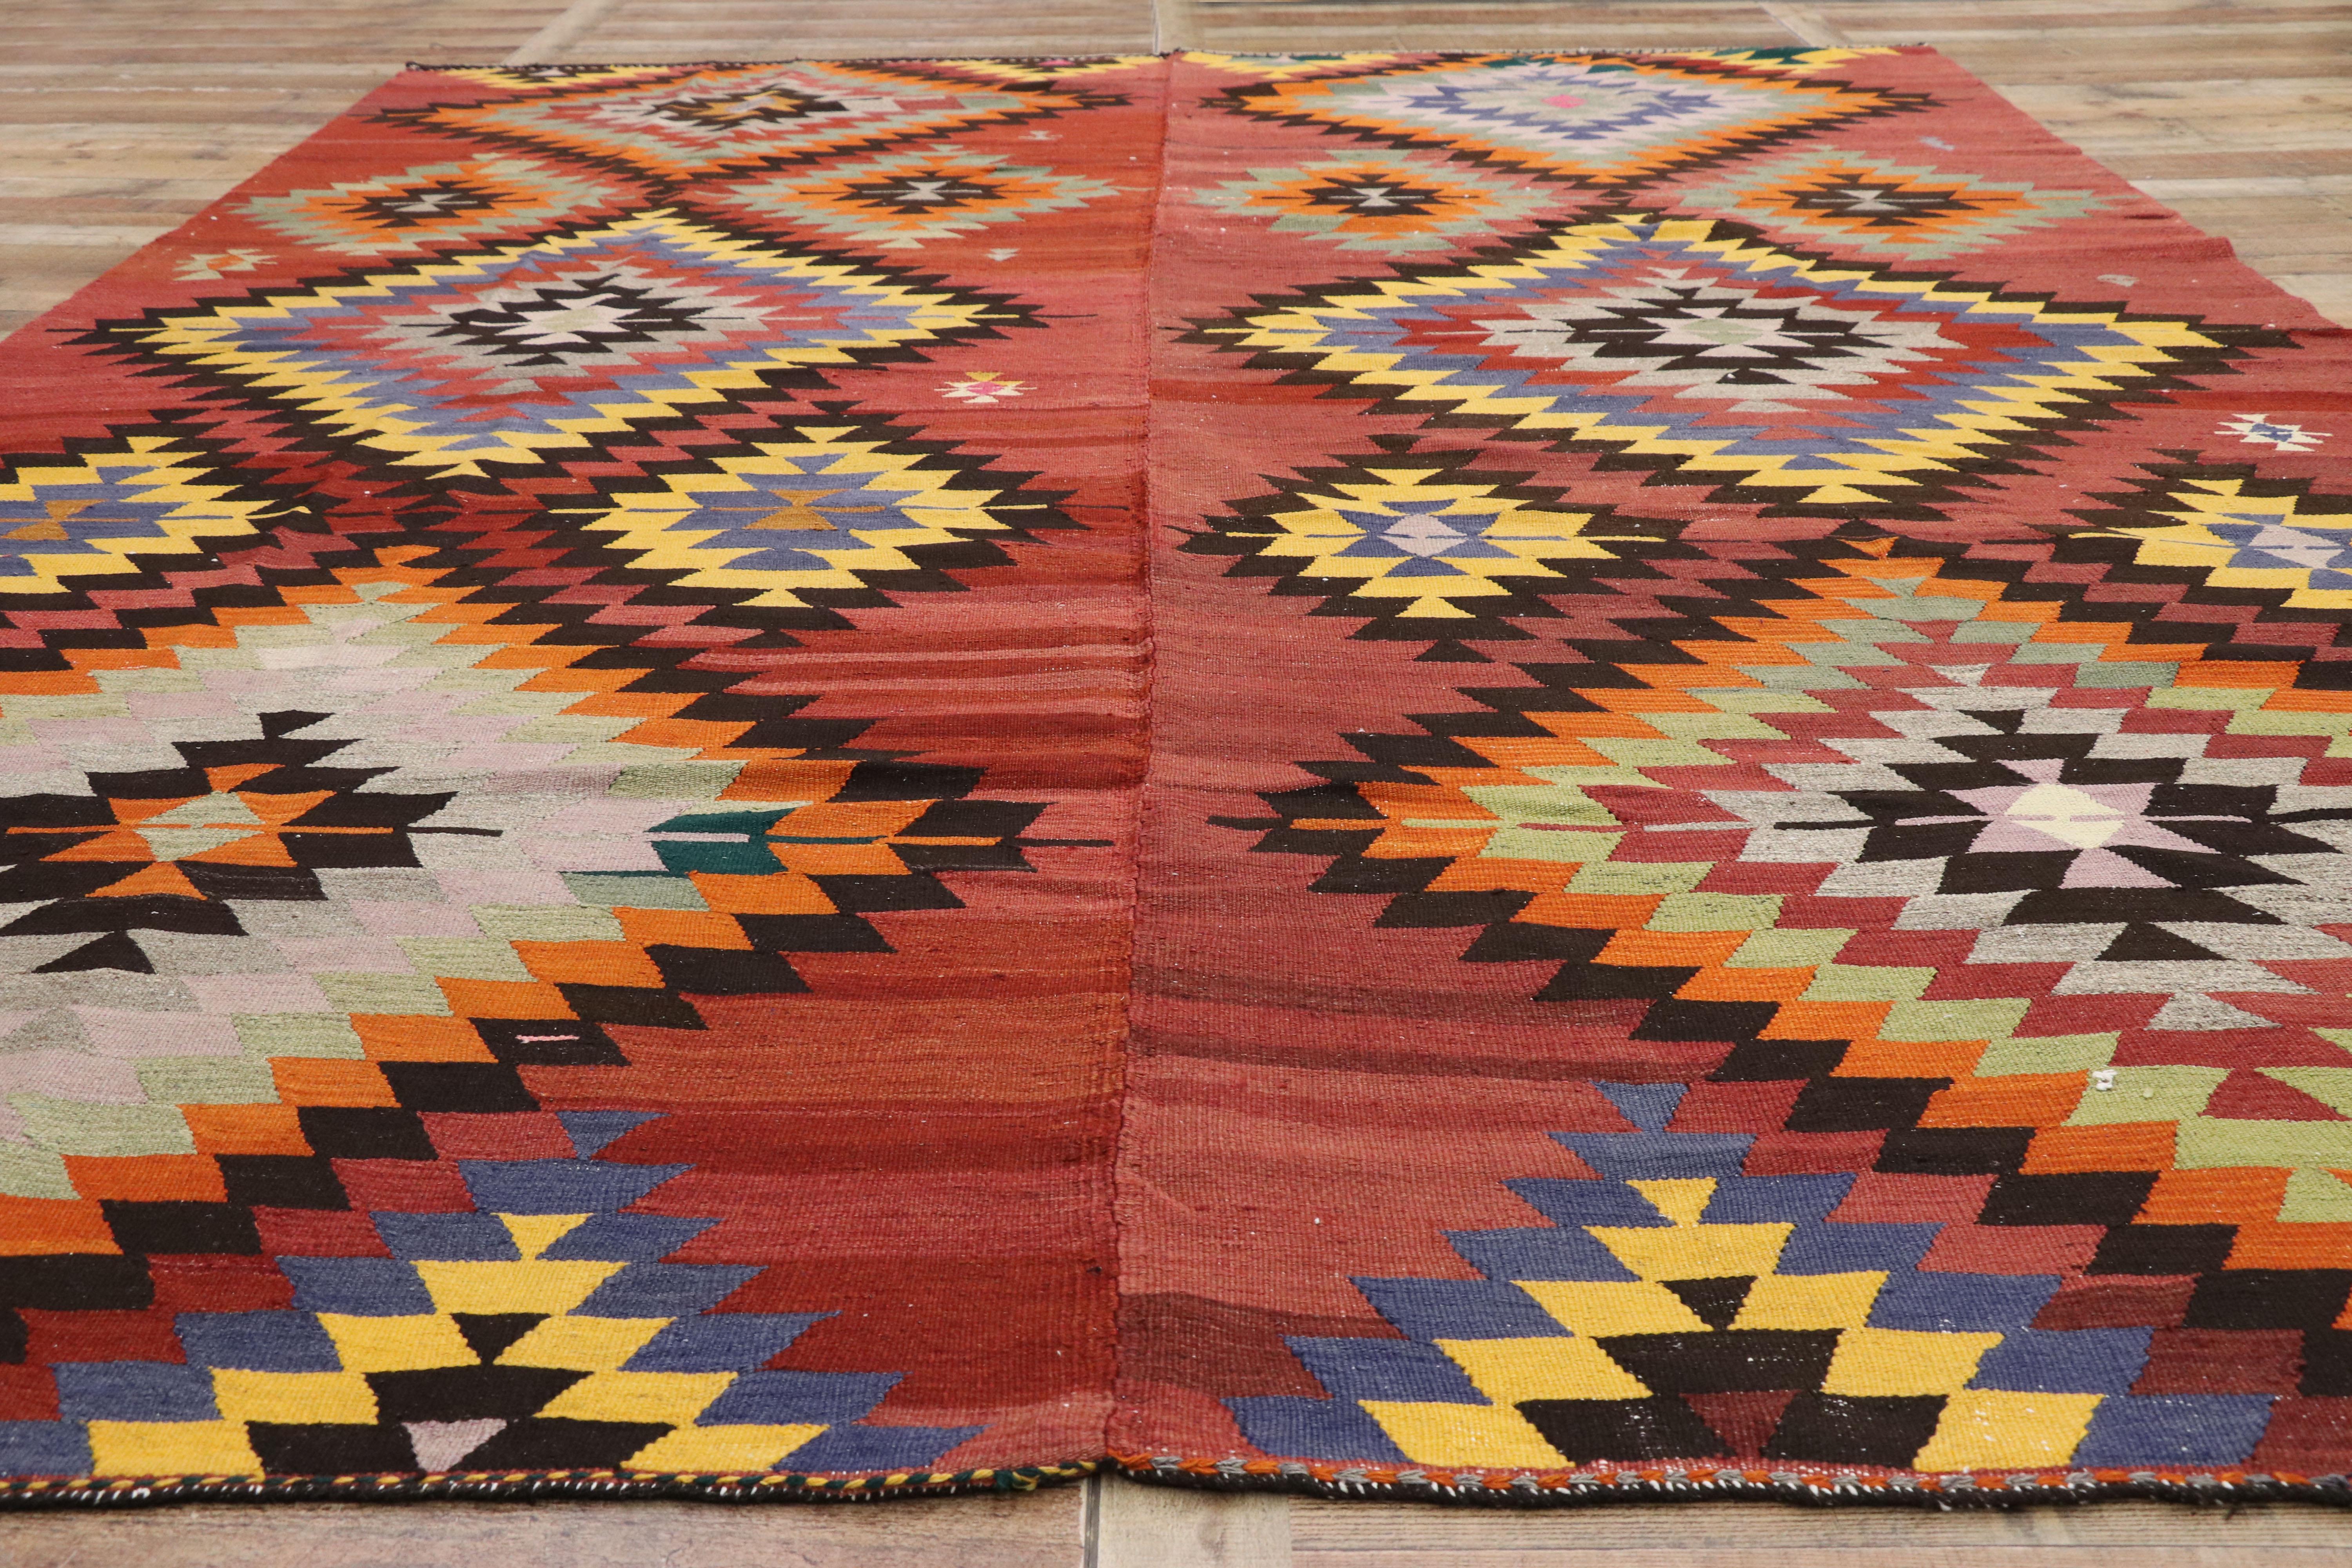 Distressed Vintage Turkish Kilim Area Rug with Aztec Southwest Navajo Style In Distressed Condition For Sale In Dallas, TX